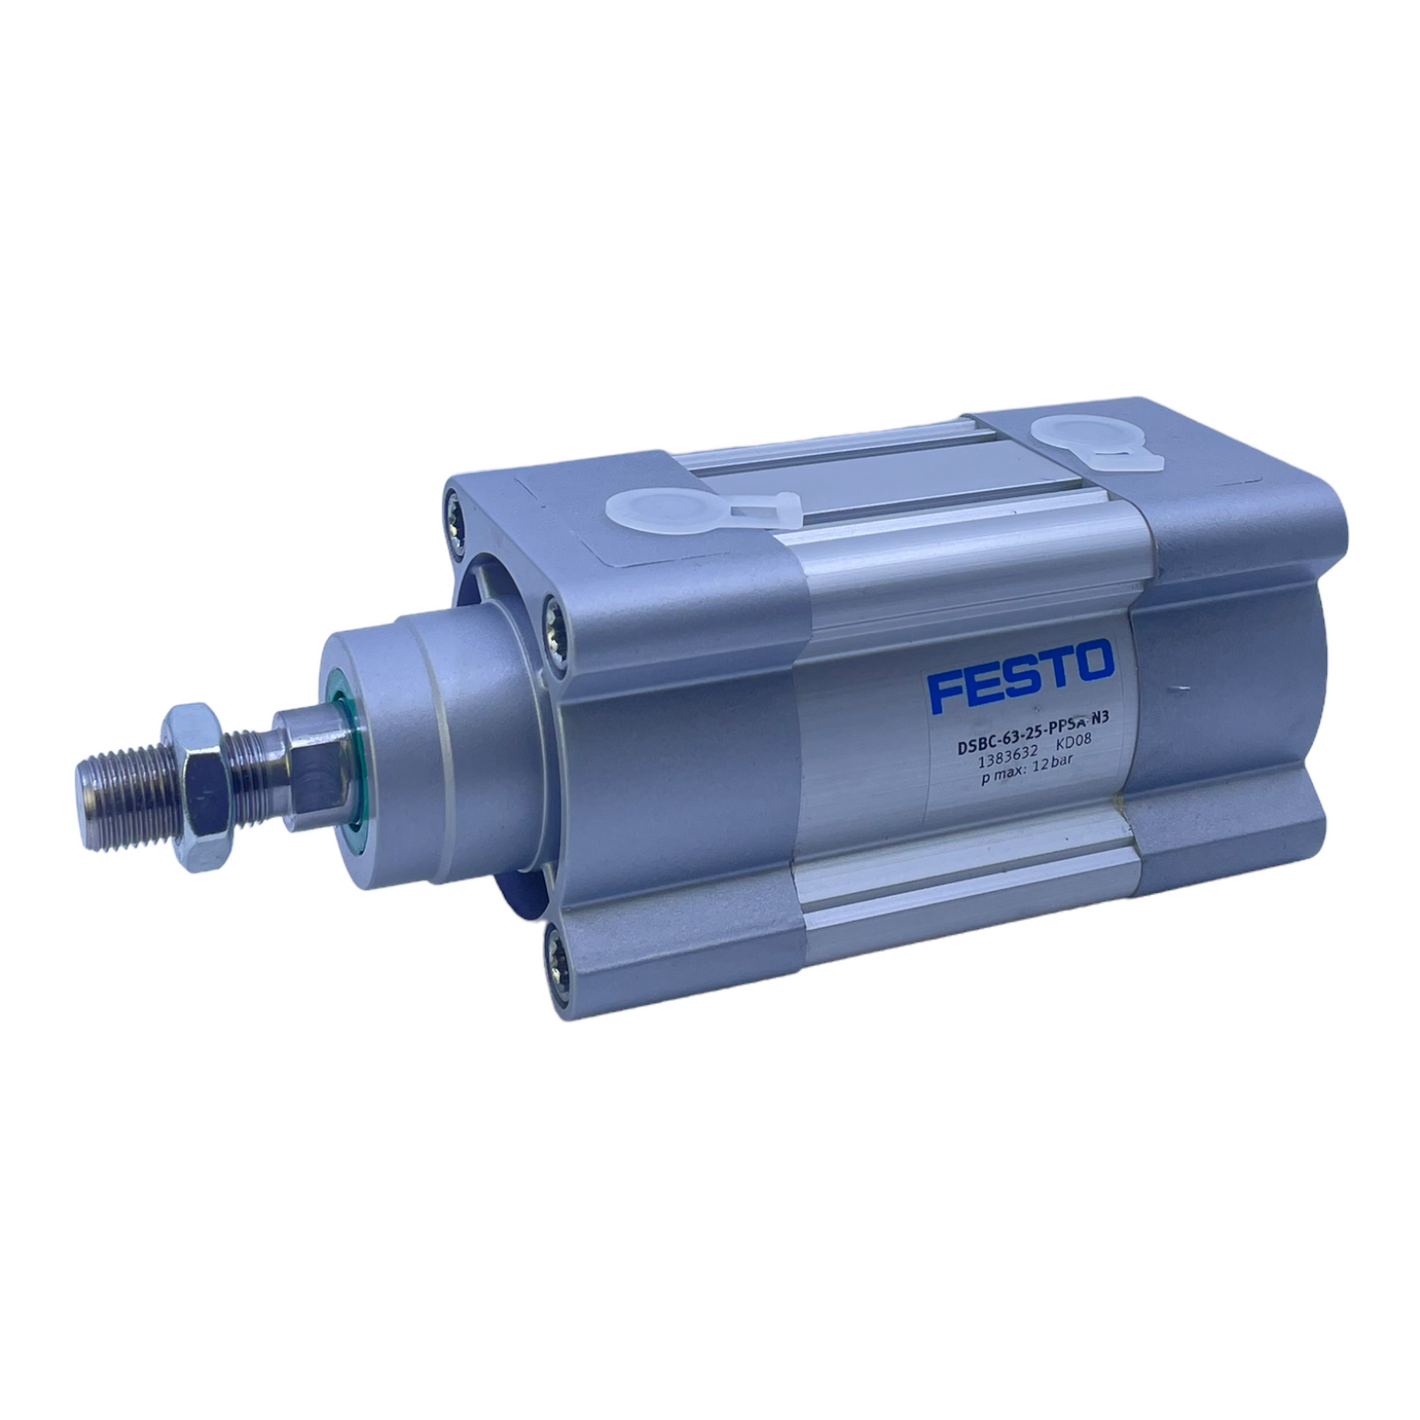 Festo DSBC-63-25-PPSA-N3 standard cylinder 1383632 0.4 to 12bar double-acting